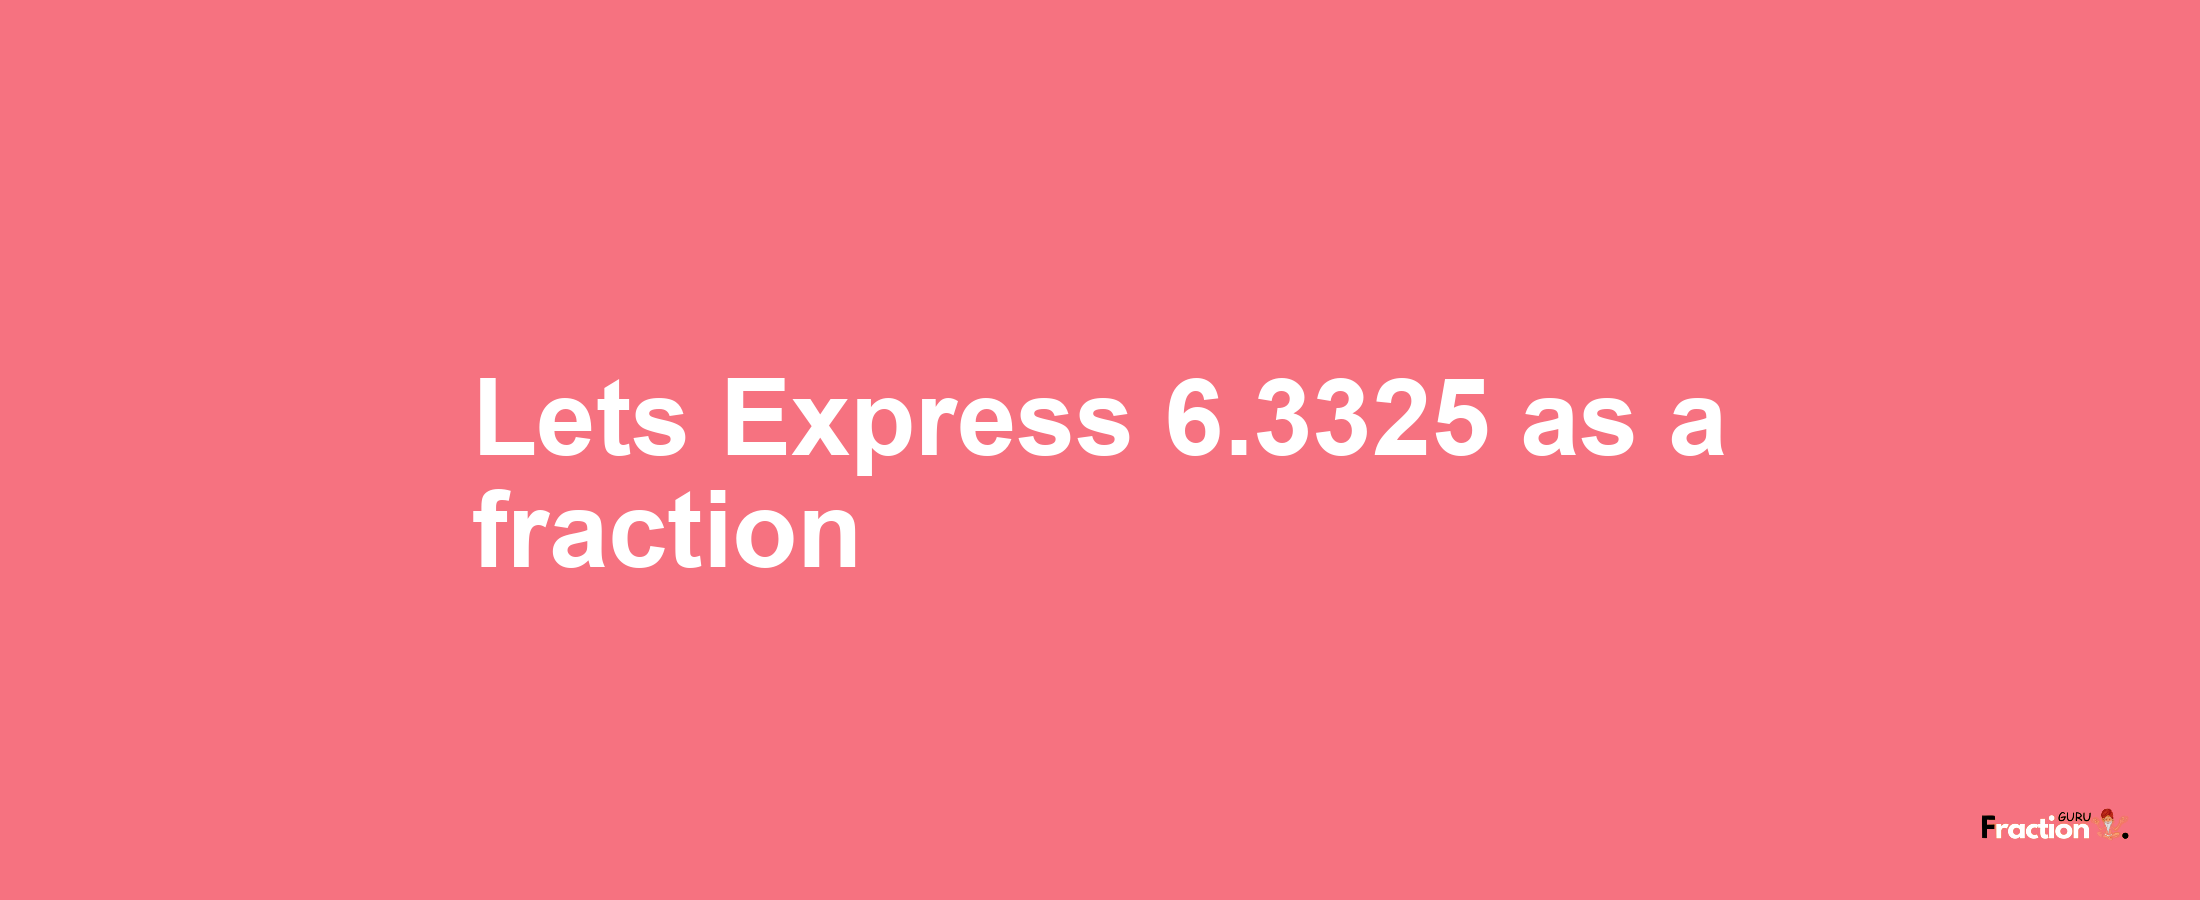 Lets Express 6.3325 as afraction